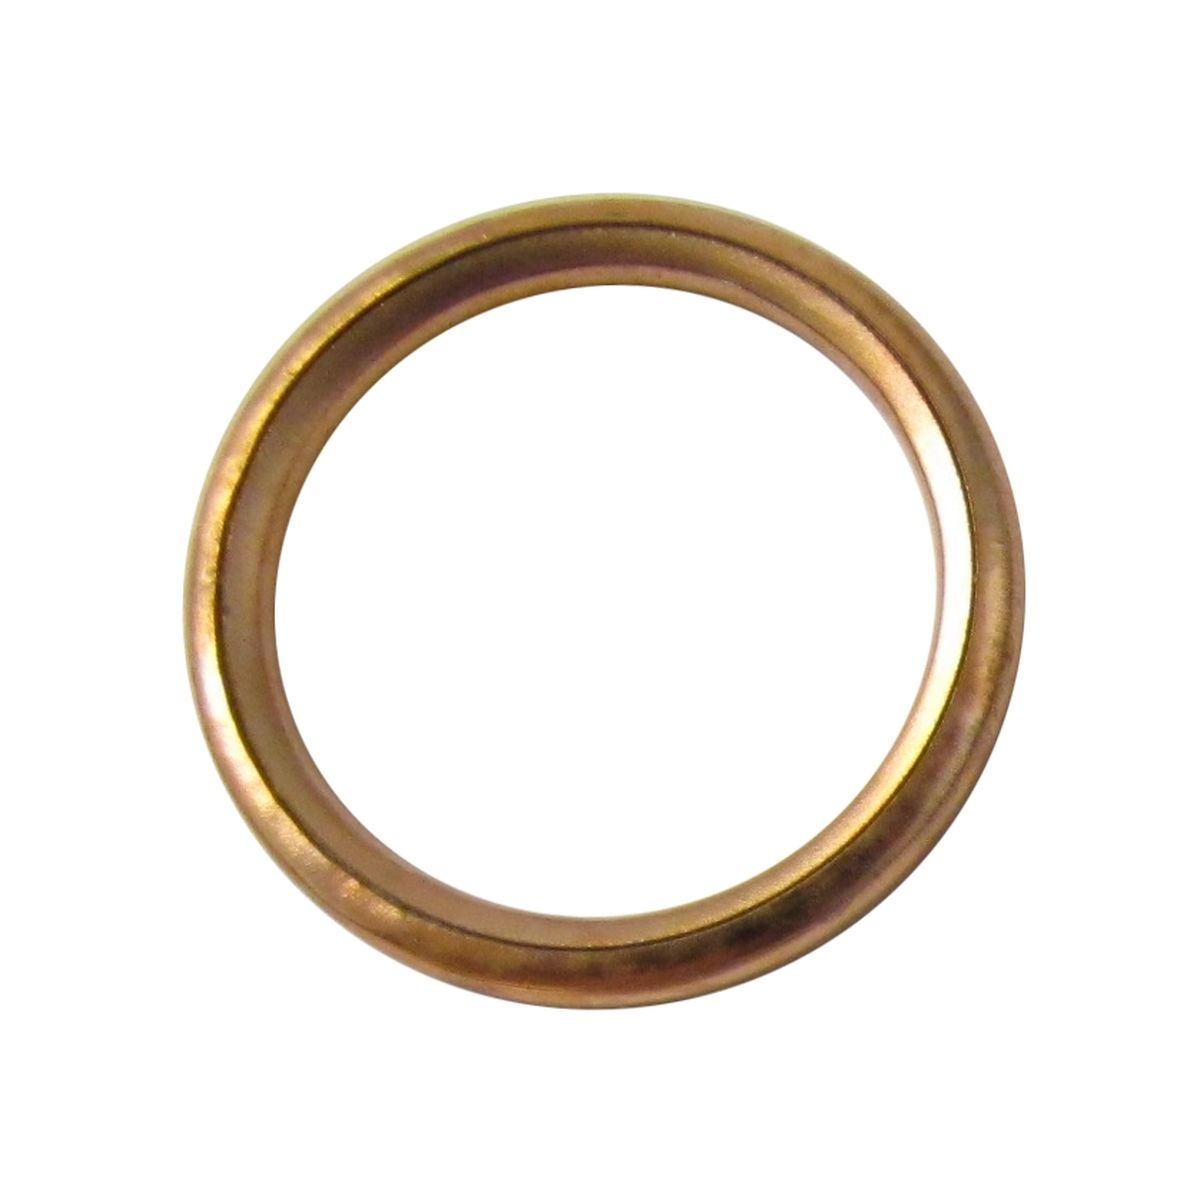 Exhaust Gasket Copper 1 for Factory outlet Jacksonville Mall 2010 Hurricane 50 Keeway